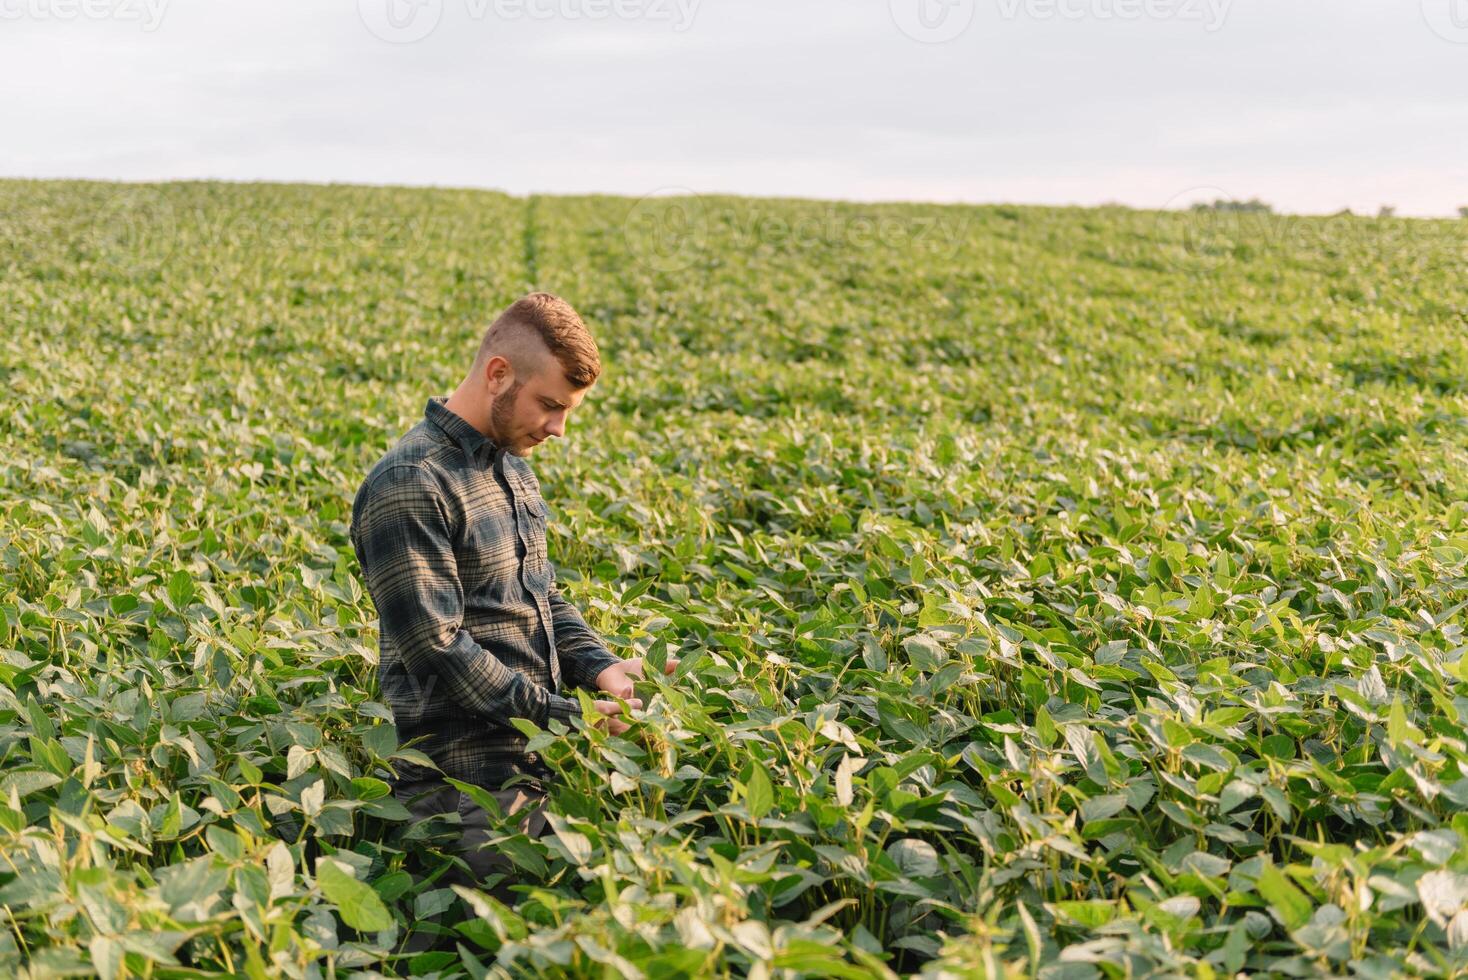 Agronomist inspecting soya bean crops growing in the farm field. Agriculture production concept. Agribusiness concept. agricultural engineer standing in a soy field photo